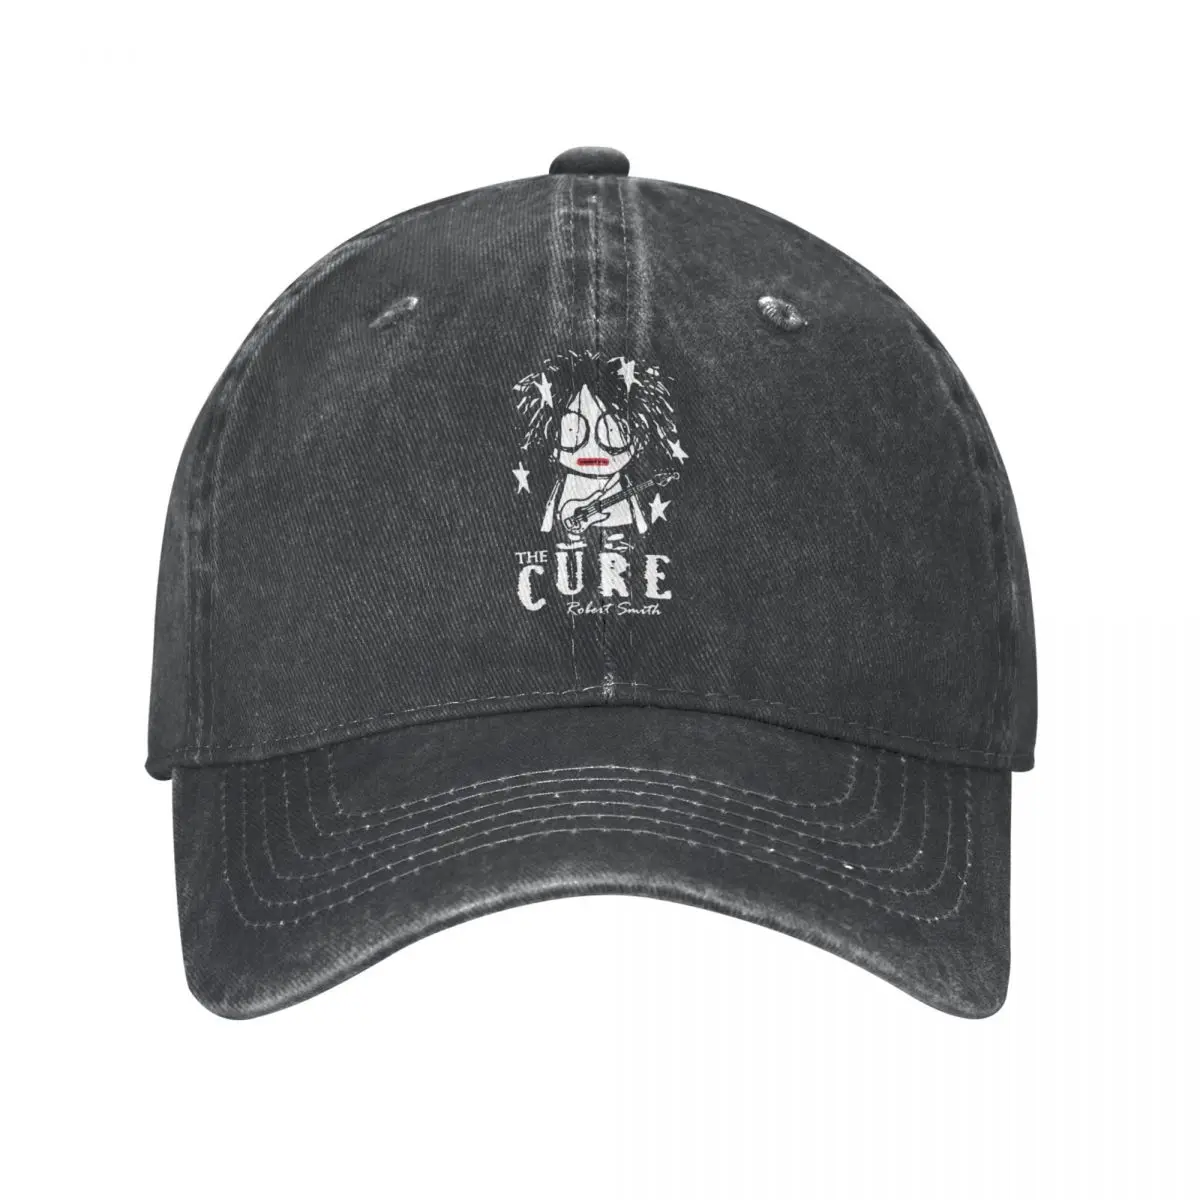 

The Cure Robert Smith Unisex Style Baseball Caps Distressed Washed Hats Cap Vintage Outdoor Unstructured Soft Snapback Hat